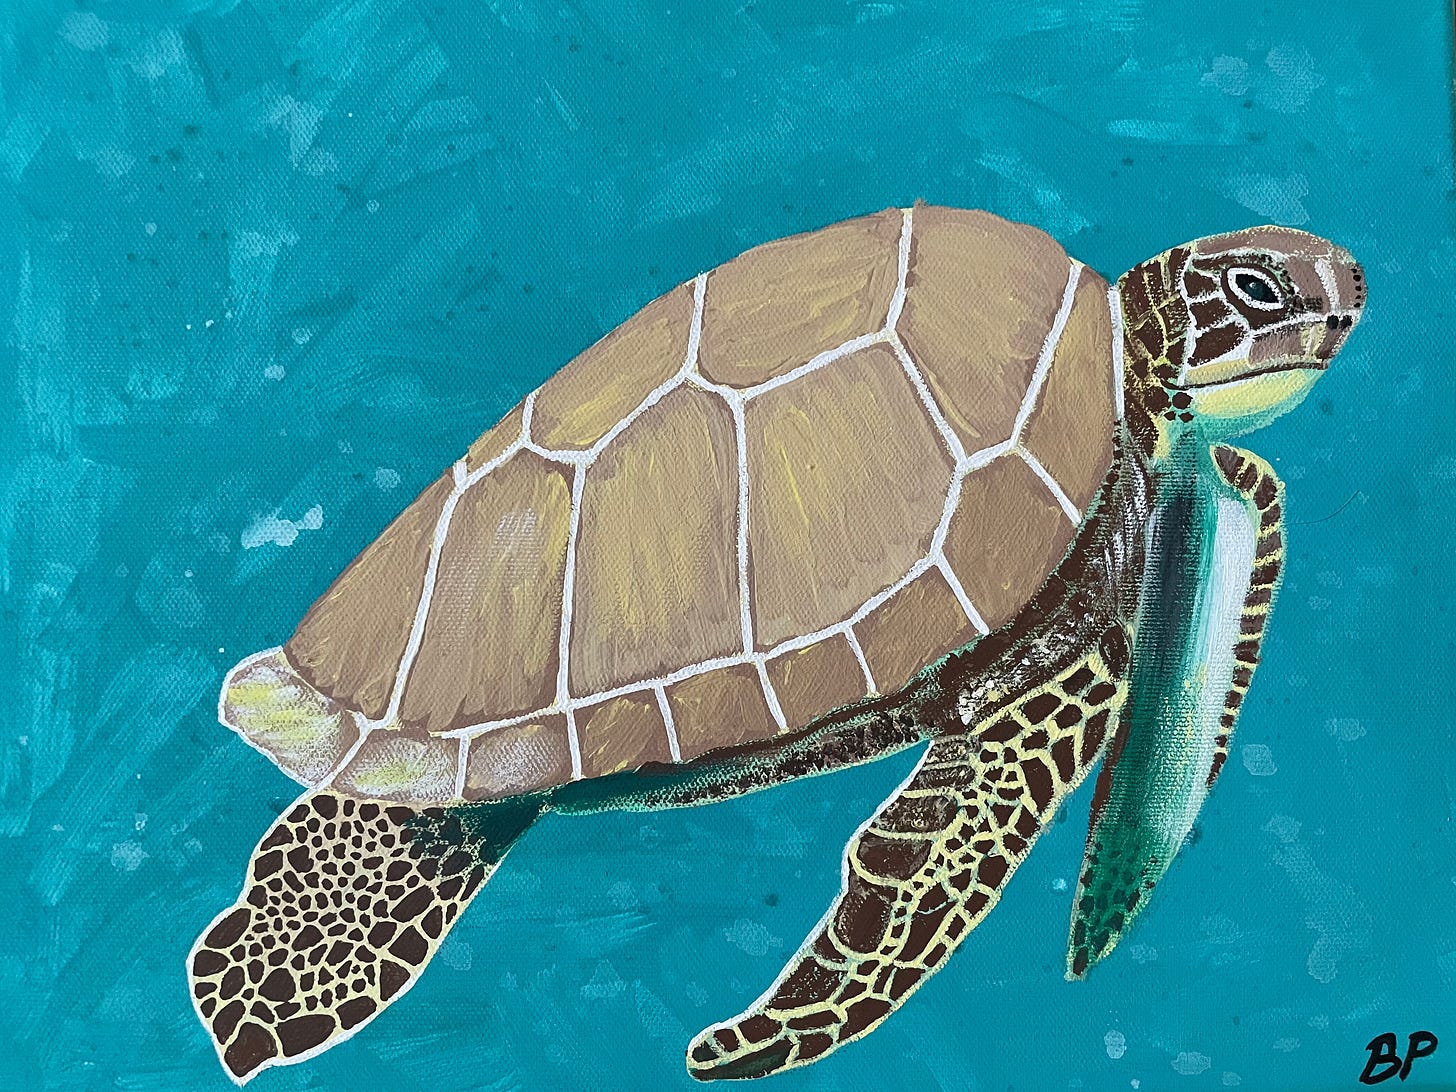 An acrylic painting of a sea turtle. The background is blue, while the turtle is shades of brown, white, and green. 